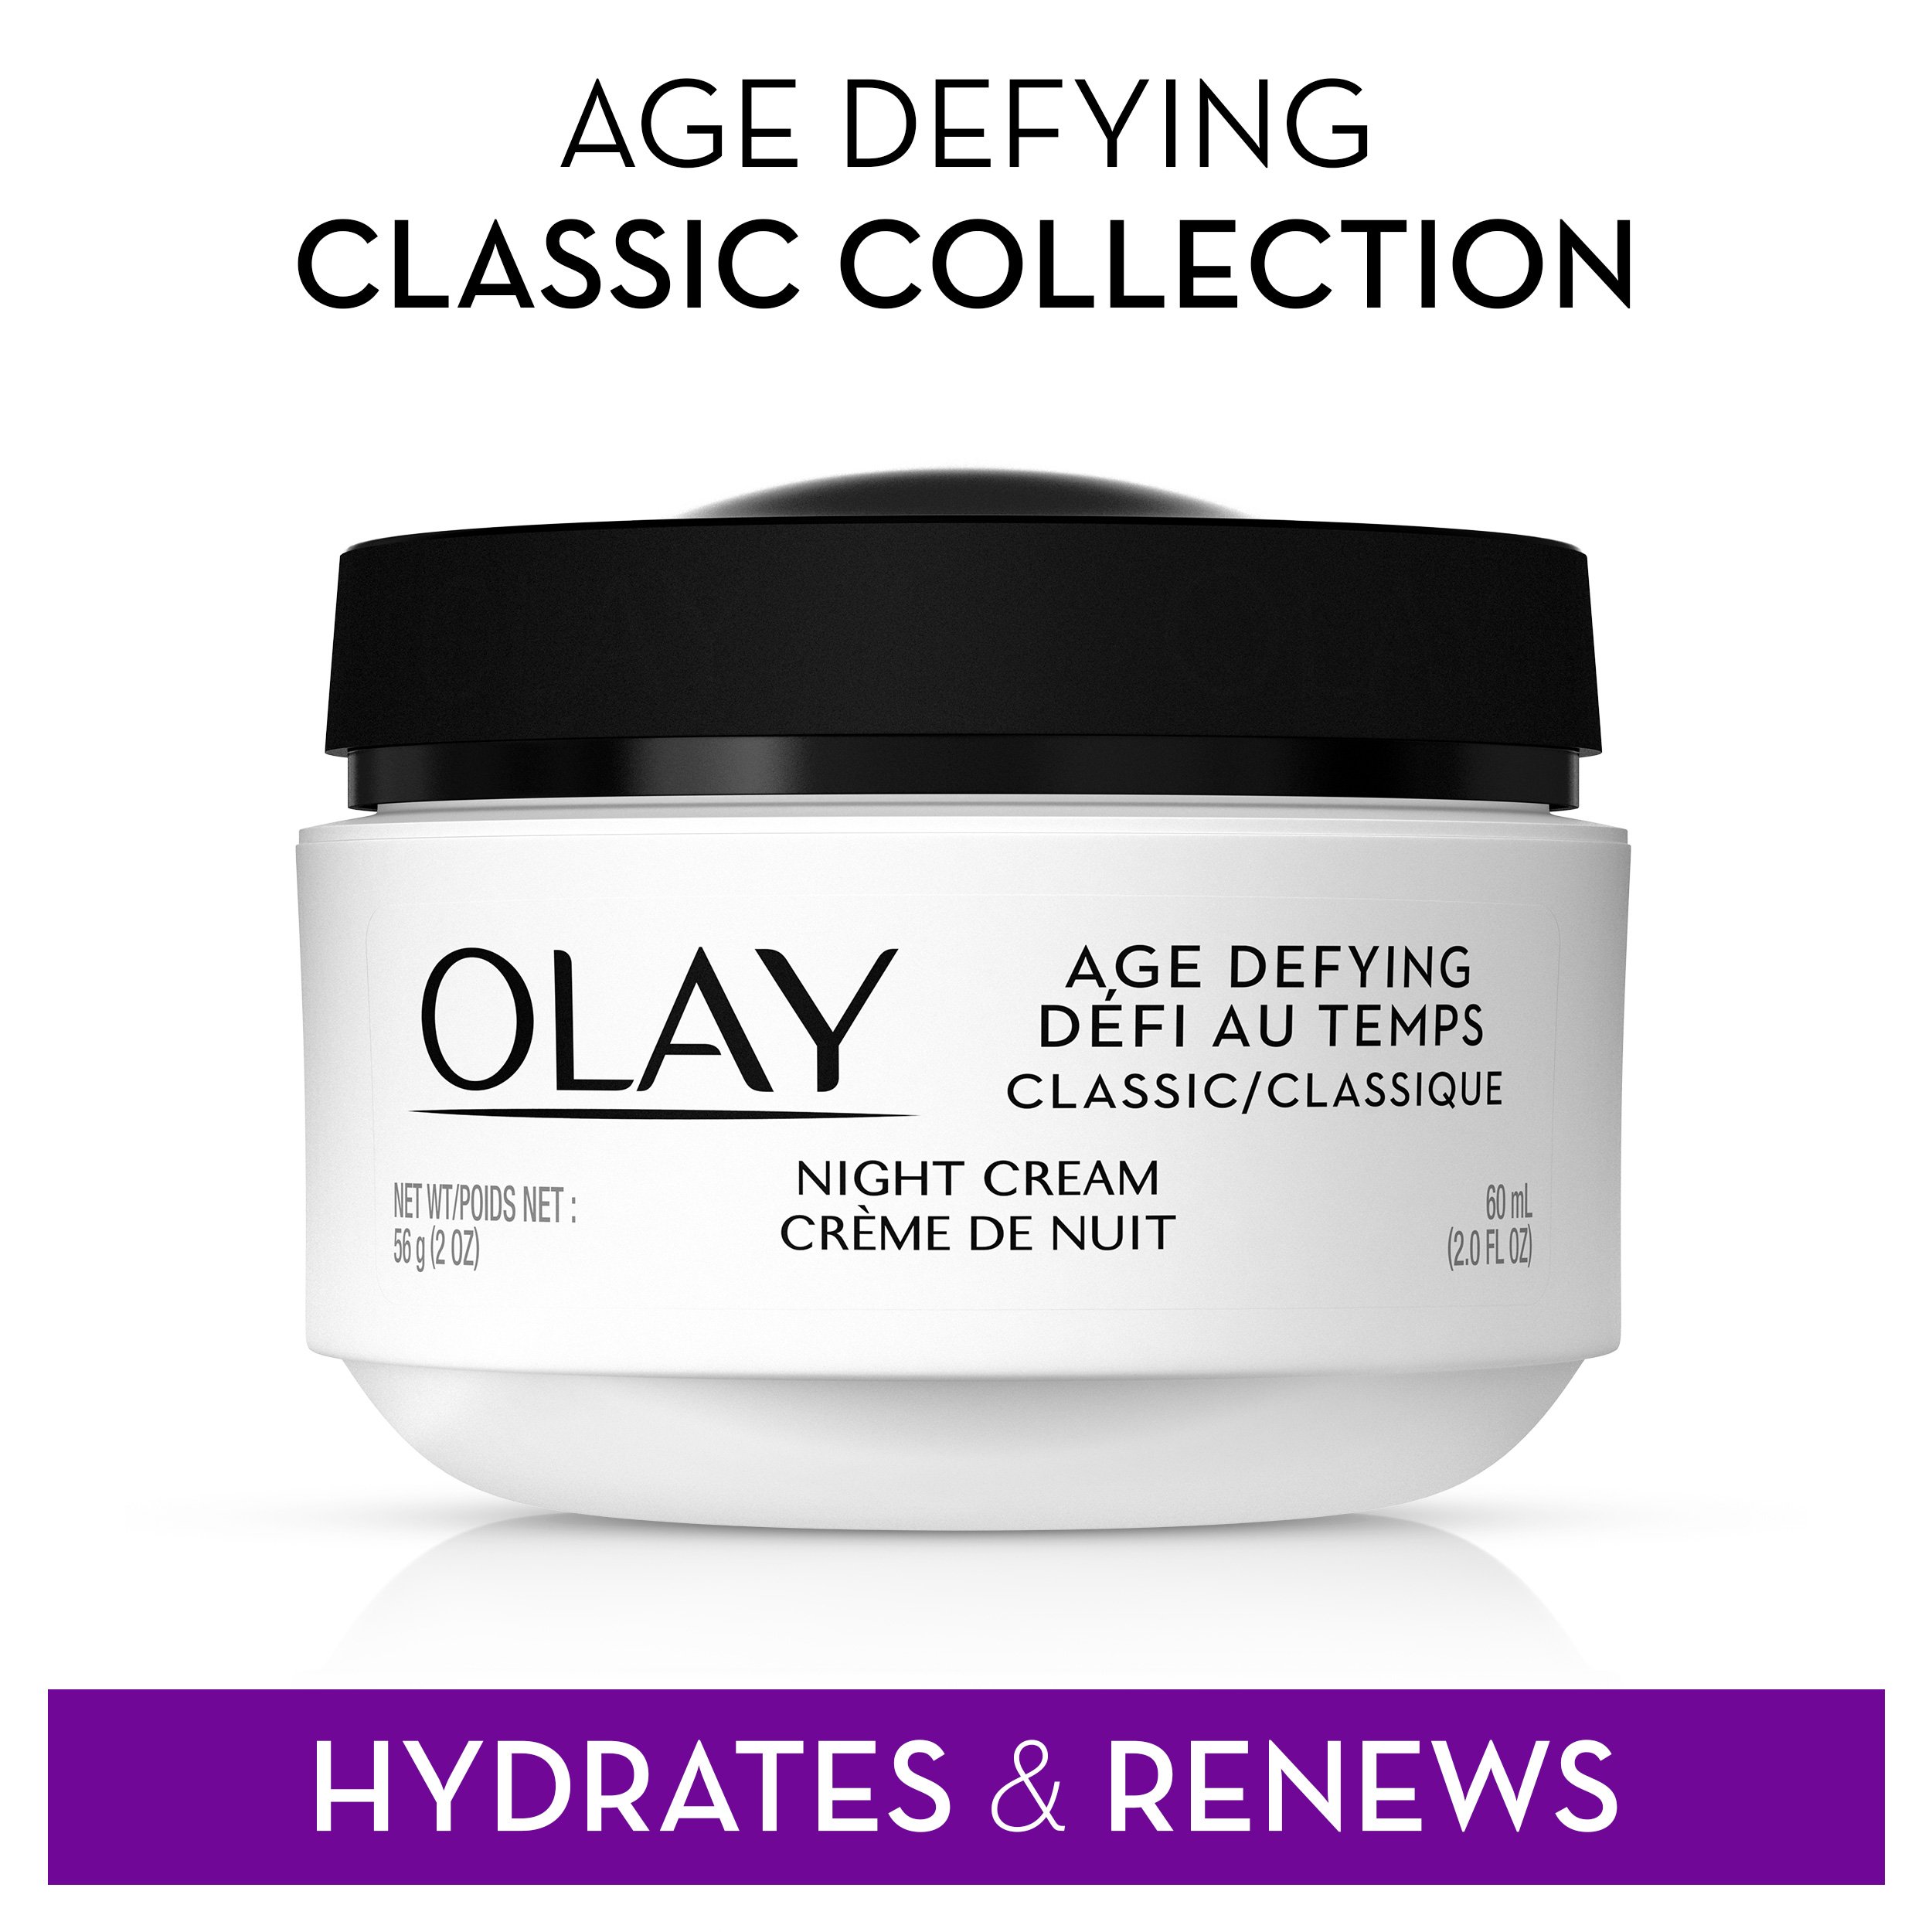 Night Cream with Beta-Hydroxy Complex and Vitamin E by Olay Age Defying,Classic, 2 Fl Oz (Pack of 2)